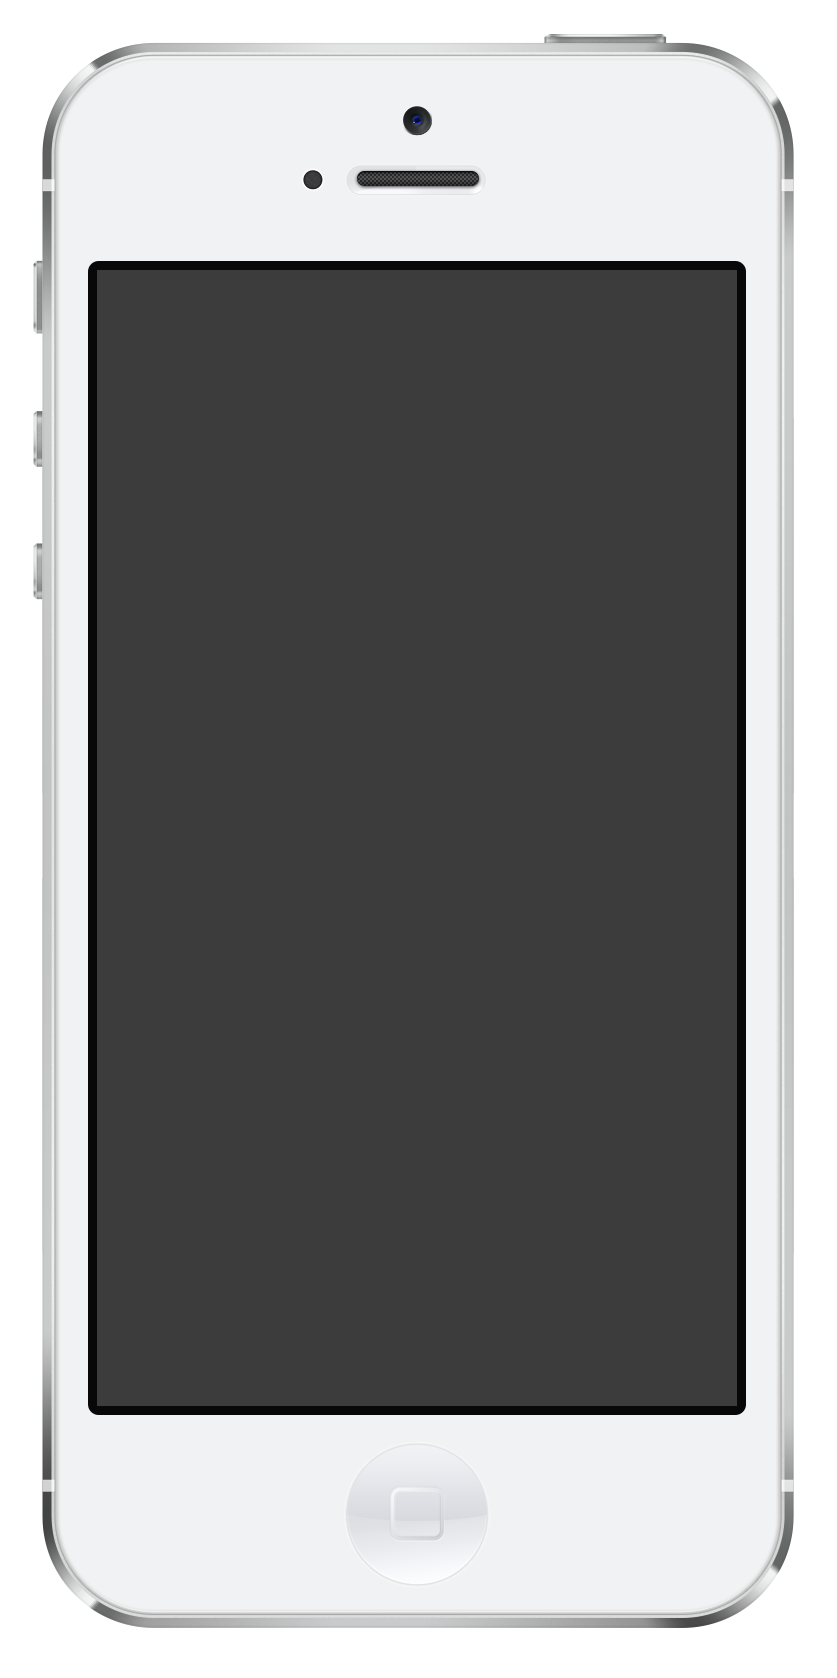 Apple Iphone Png Image - Iphone Black And White, Transparent background PNG HD thumbnail